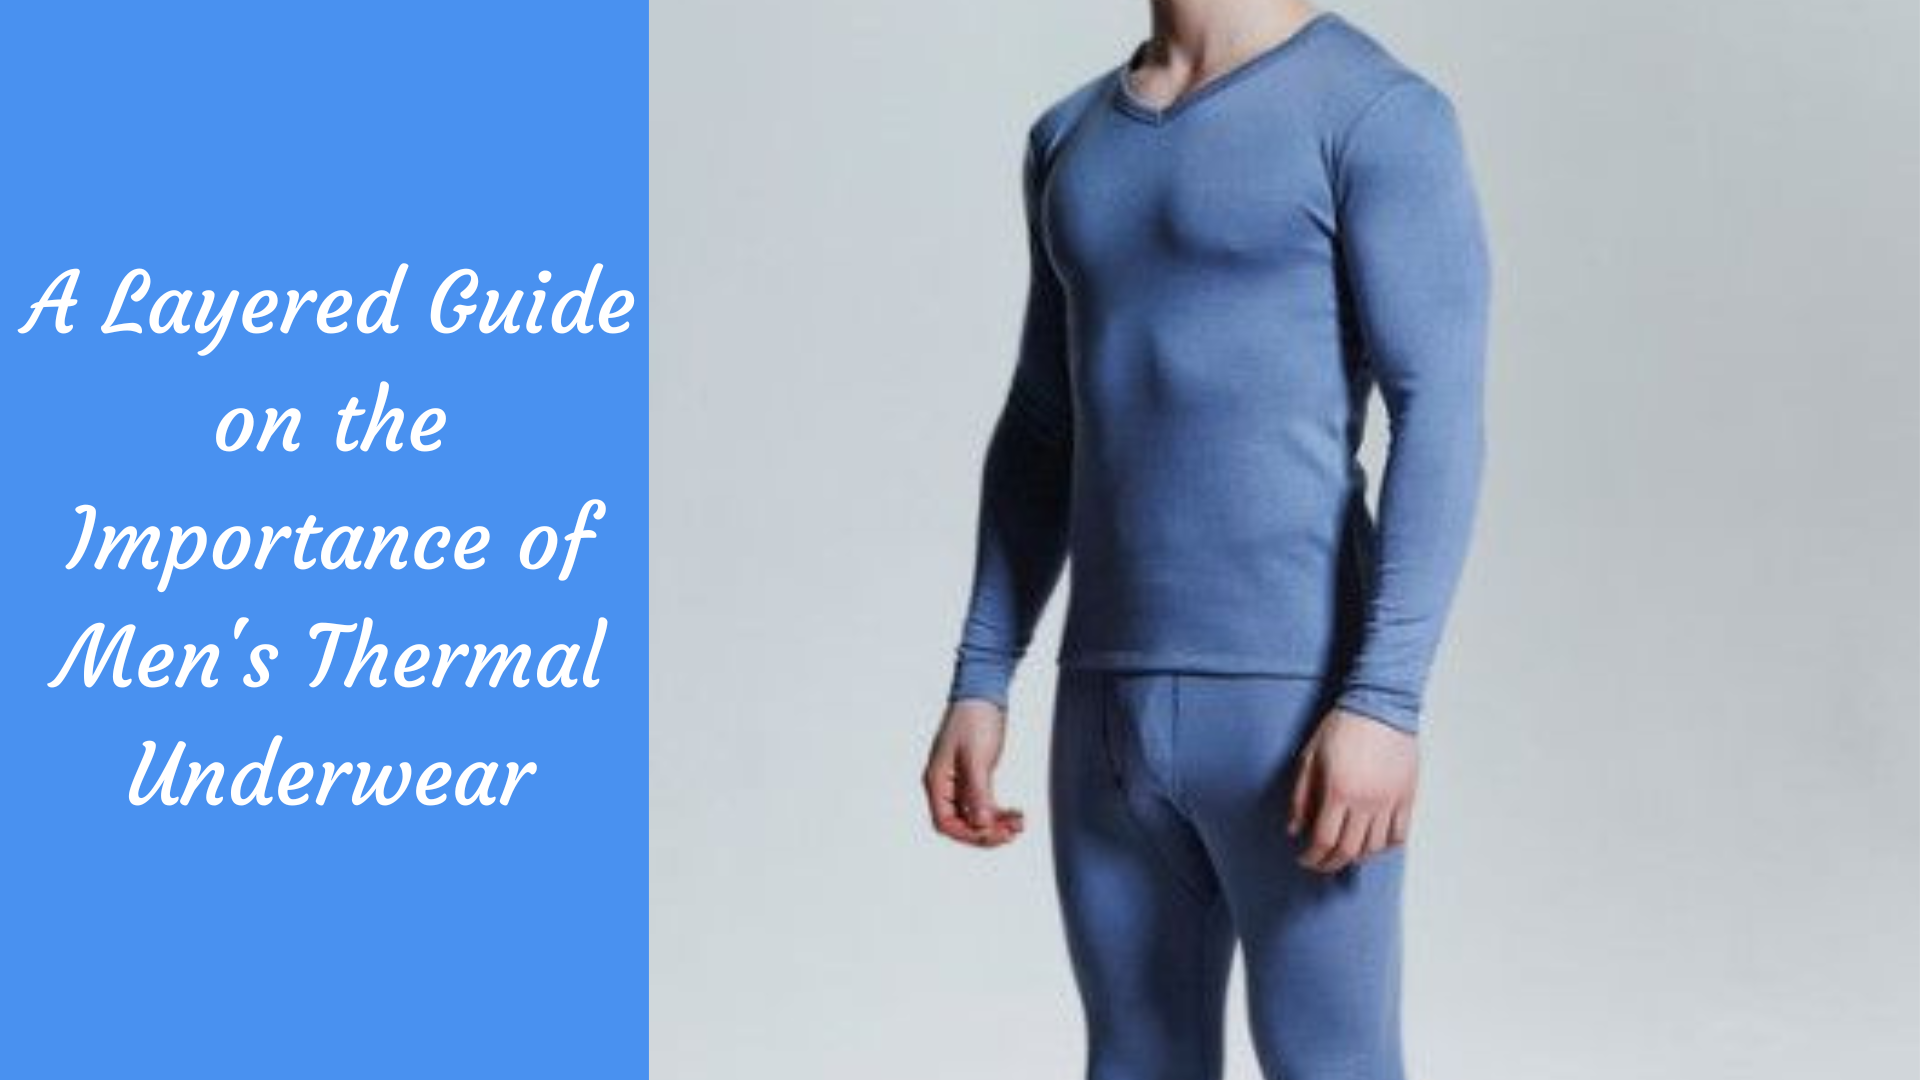 Supply Bonas Thermal Underwear Women's Thermal Underwear Long Johns Set  Anti-Bottoming Shirt Inner Wear Thermal Suit Autumn and Winter Men Thermal  Clothes